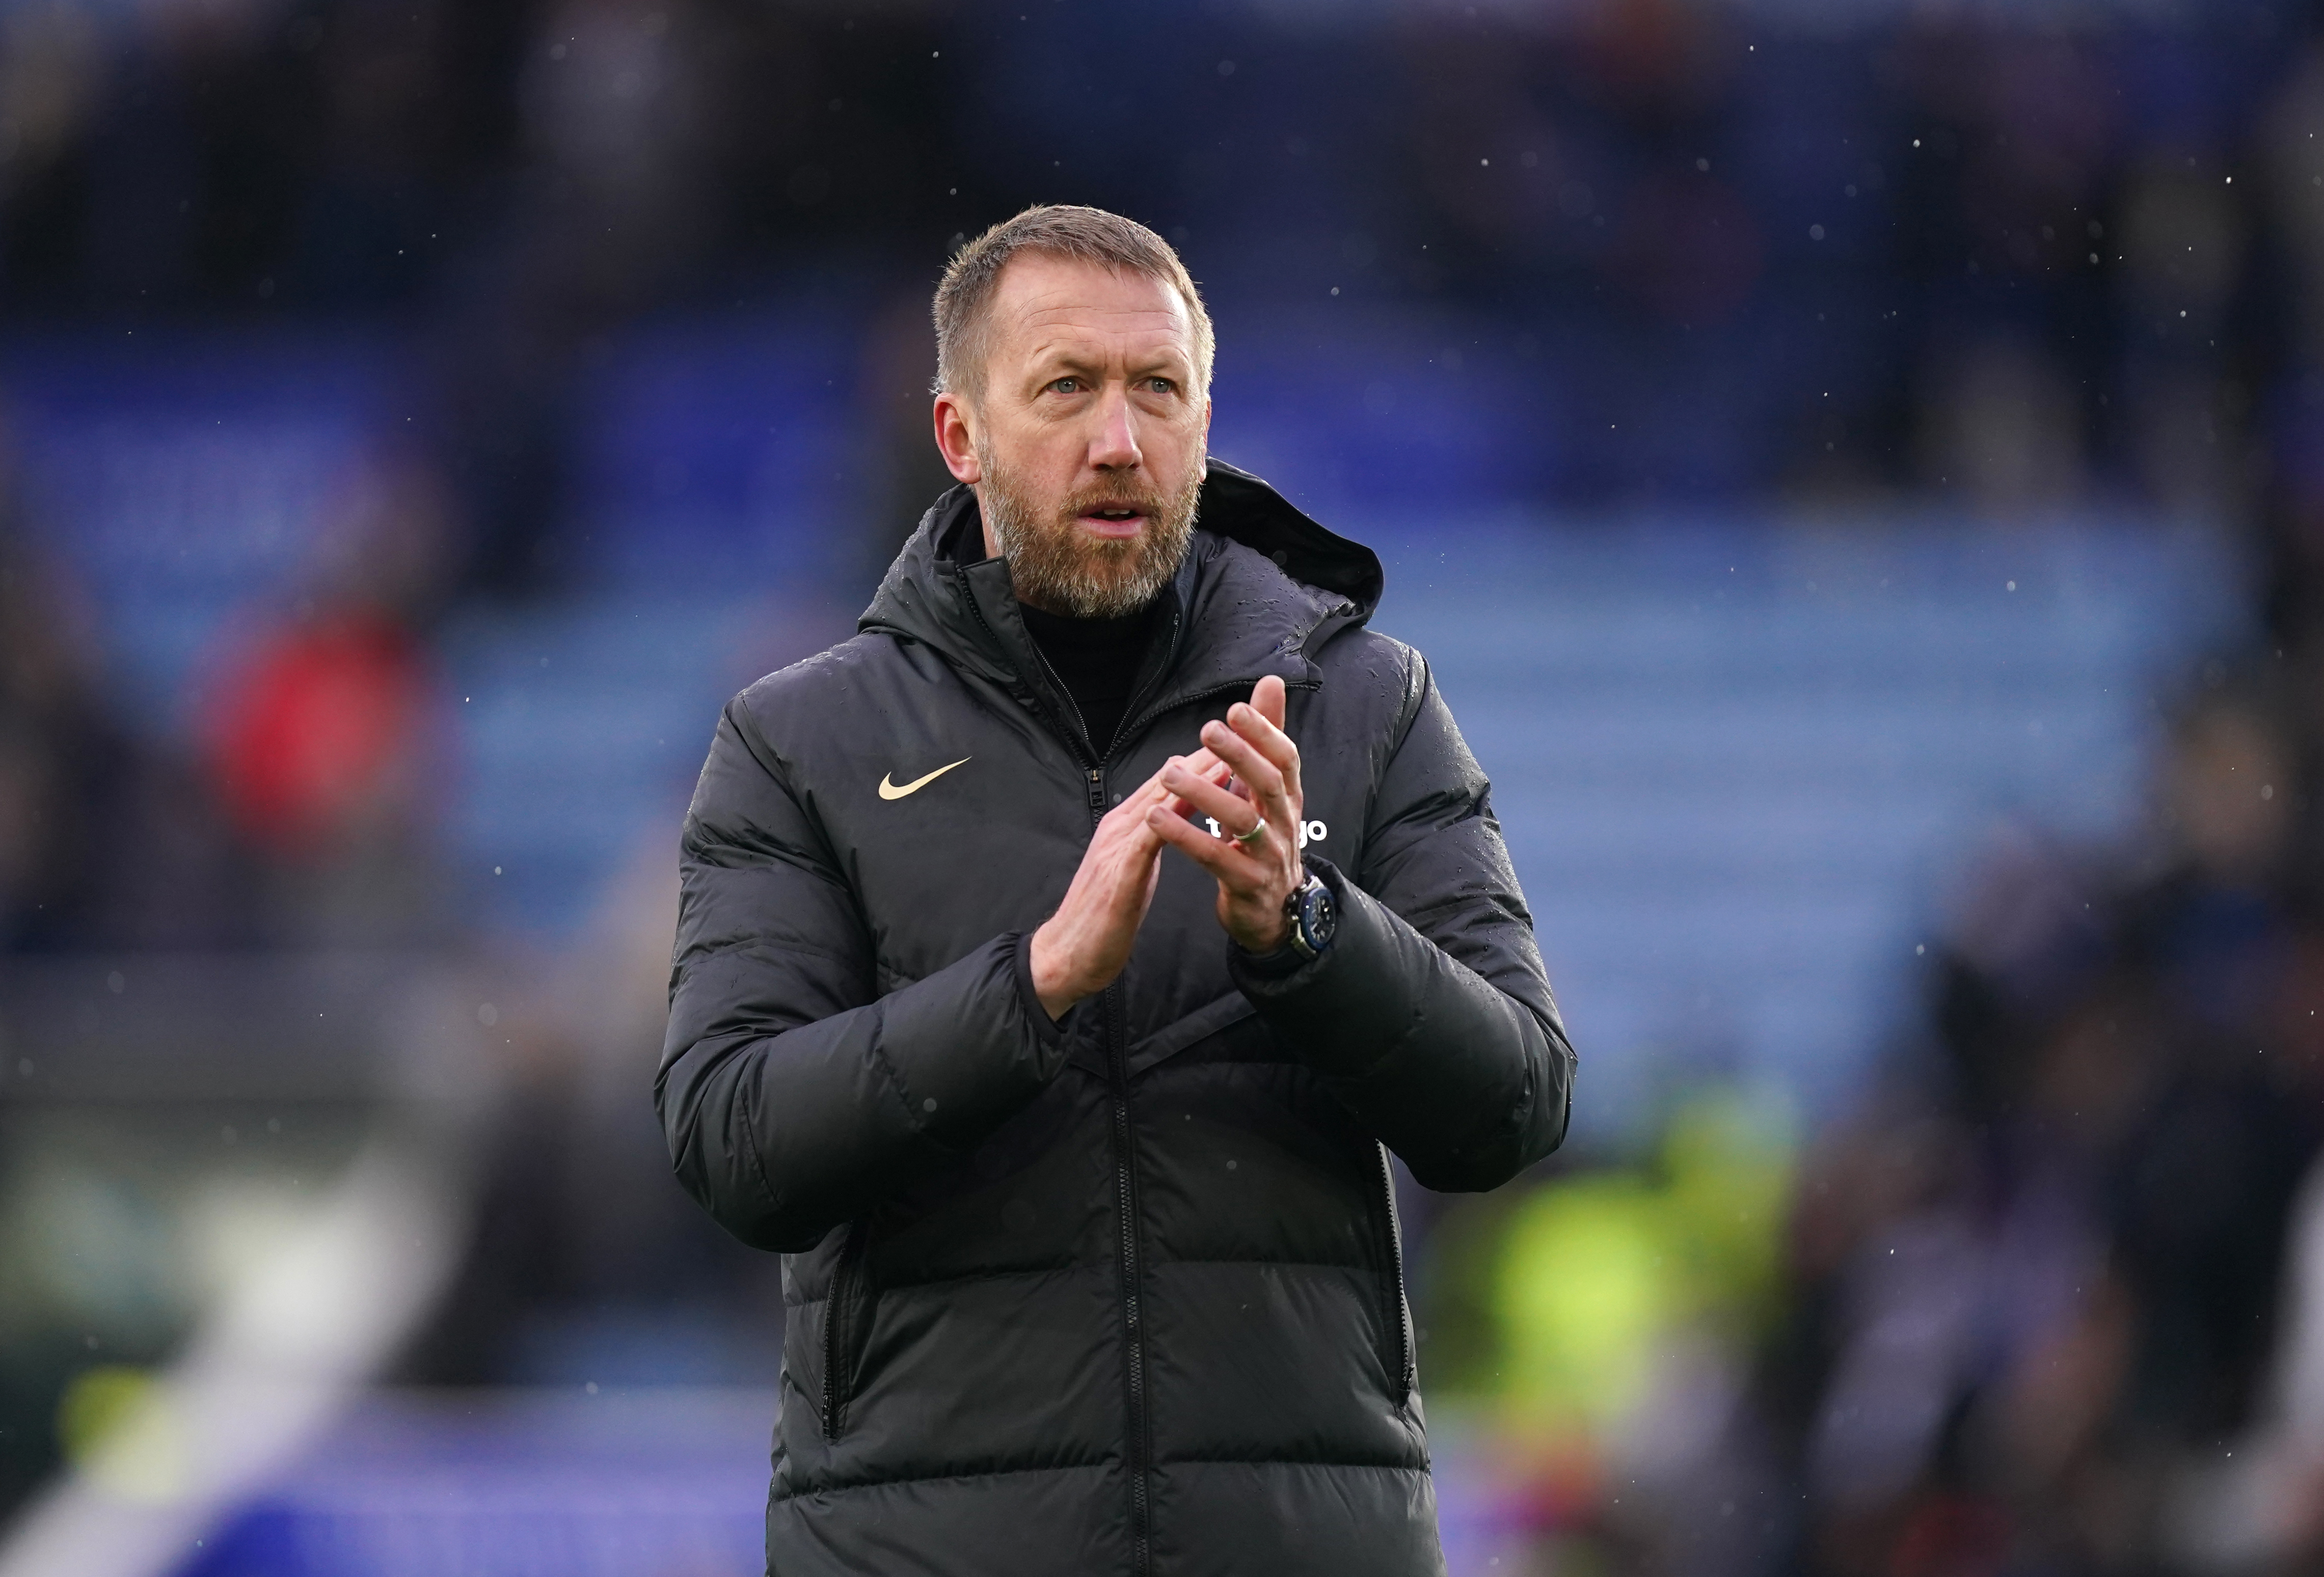 Graham Potter applauds the Chelsea fans after a win at Leicester